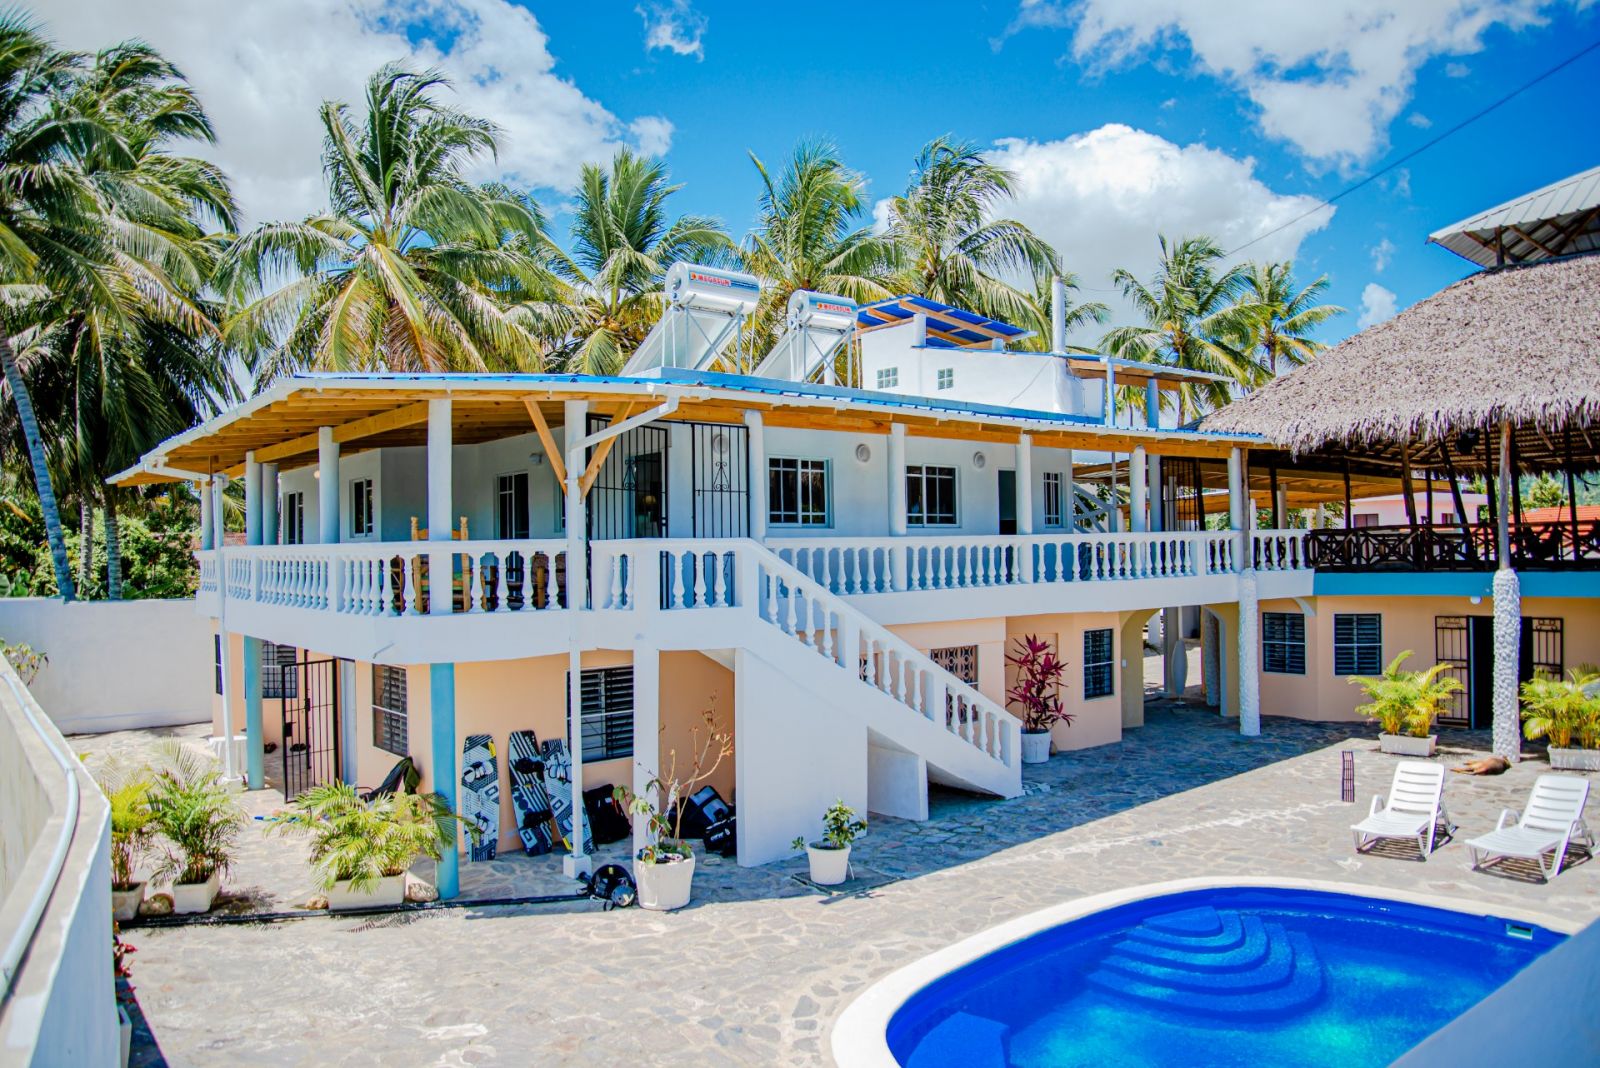 Apartment complex with 9 studios and a penthouse | Cabarete